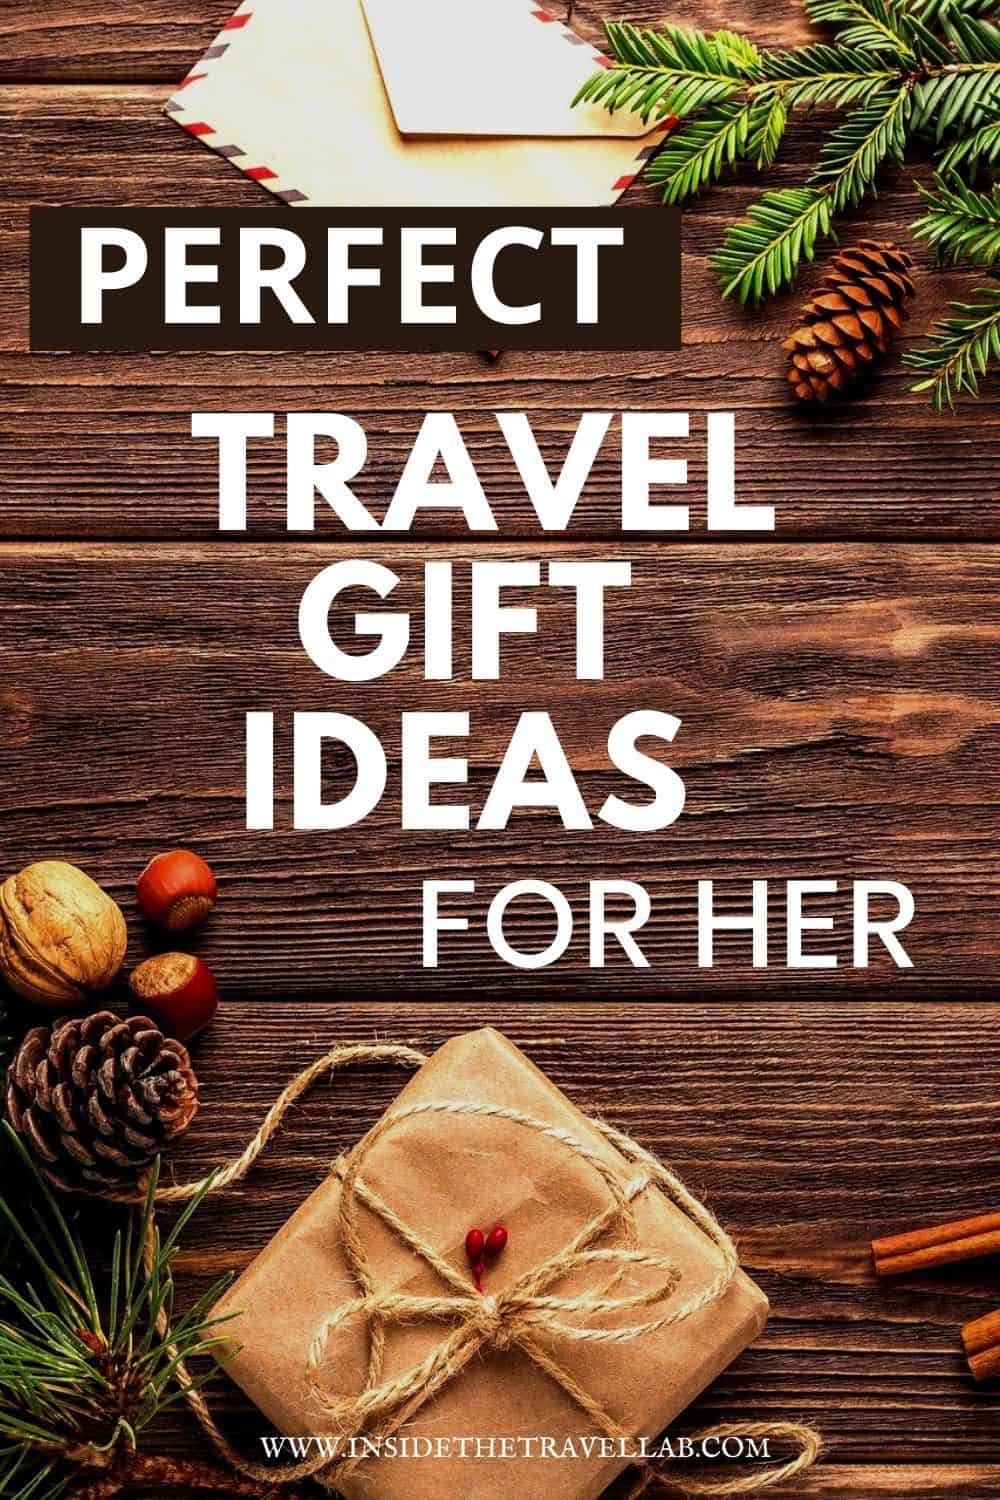 Perfect travel gift ideas for her cover image